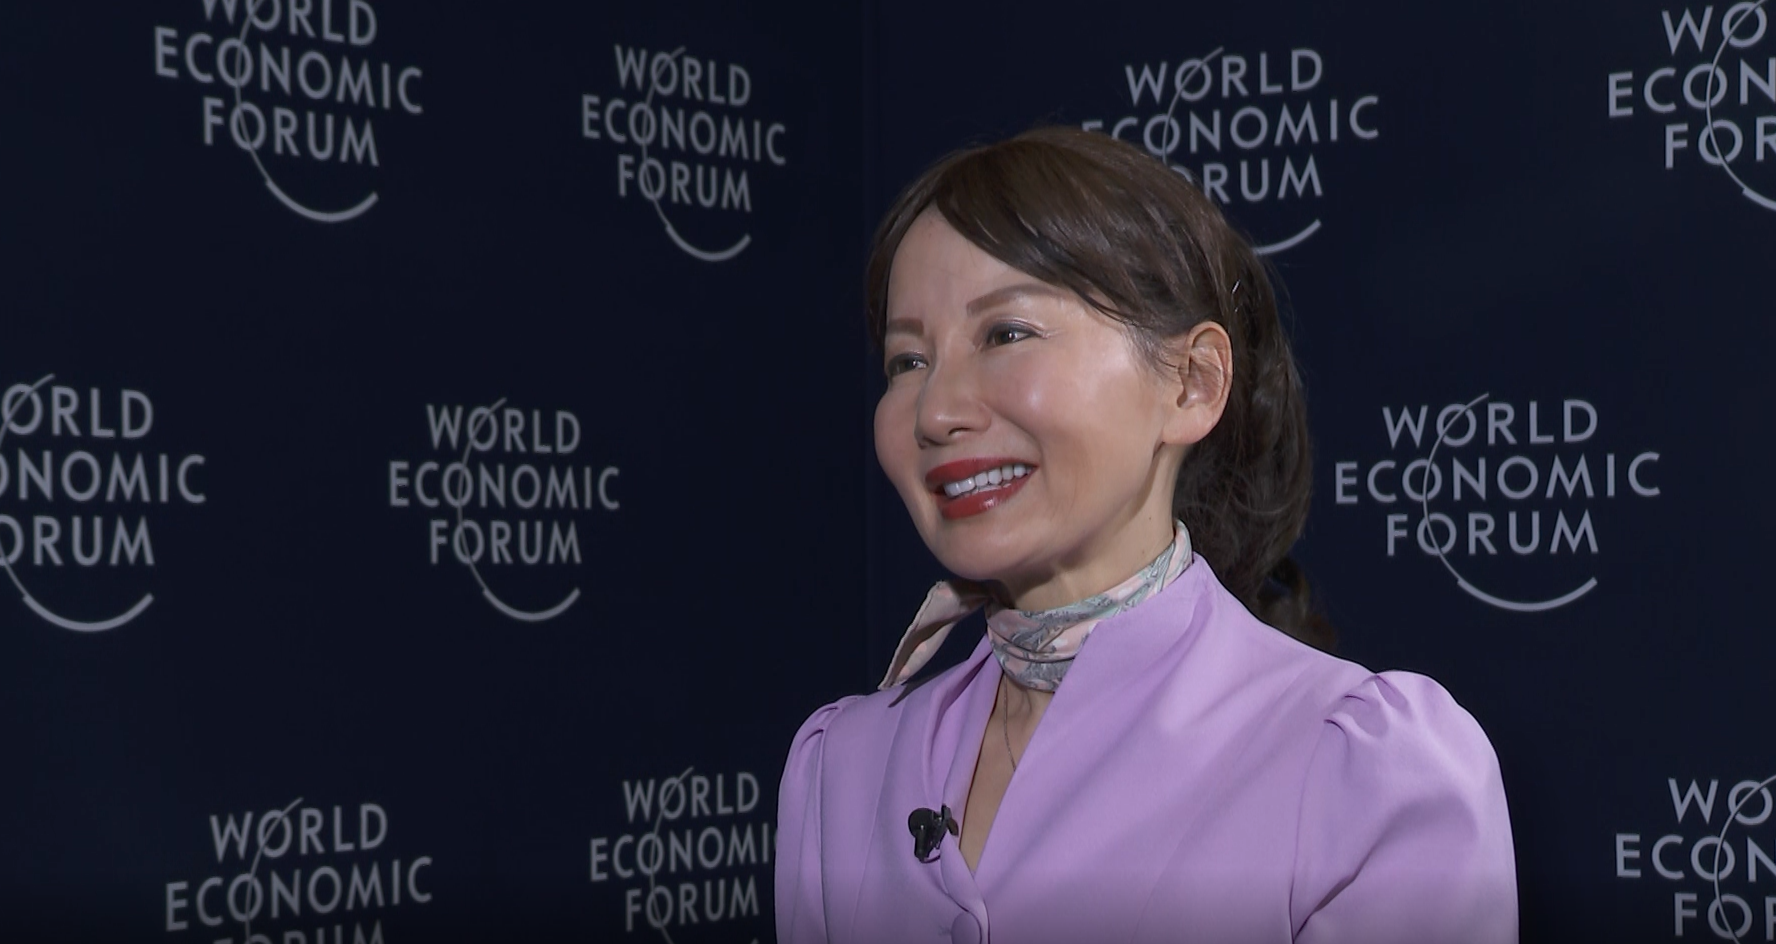 Trip.com CEO Jane Sun speaks to CGTN Europe on the sidelines of the World Economic Forum in Davos.